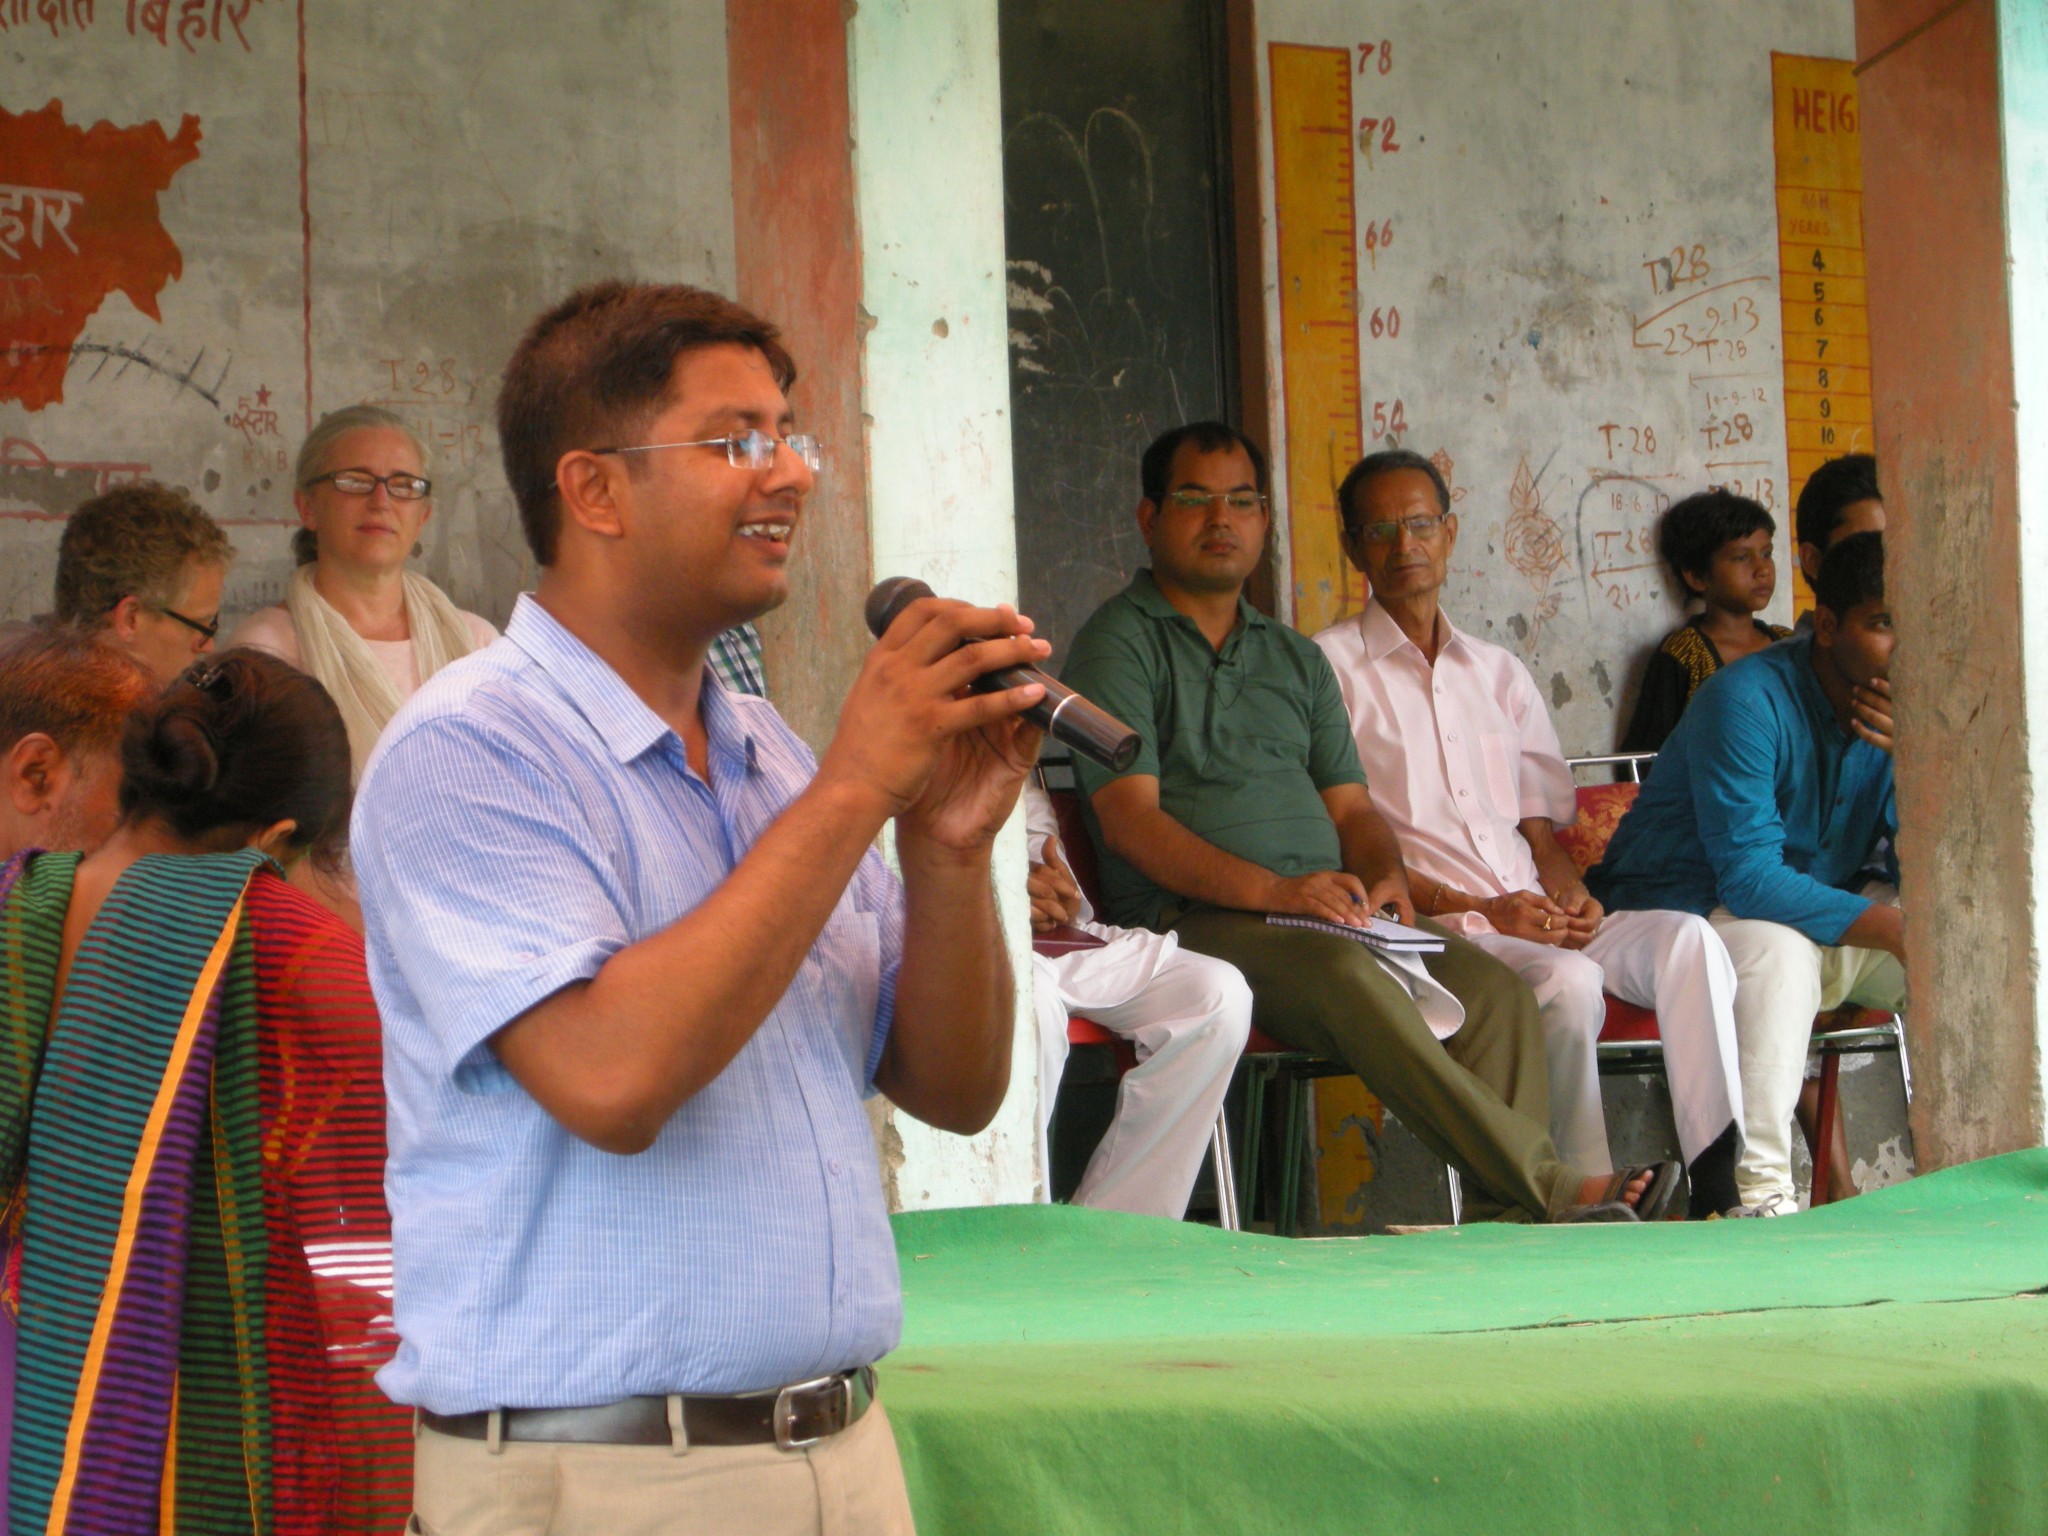 Surya briefing children and community on Prayog and Global literacy project - June 18th, 2014